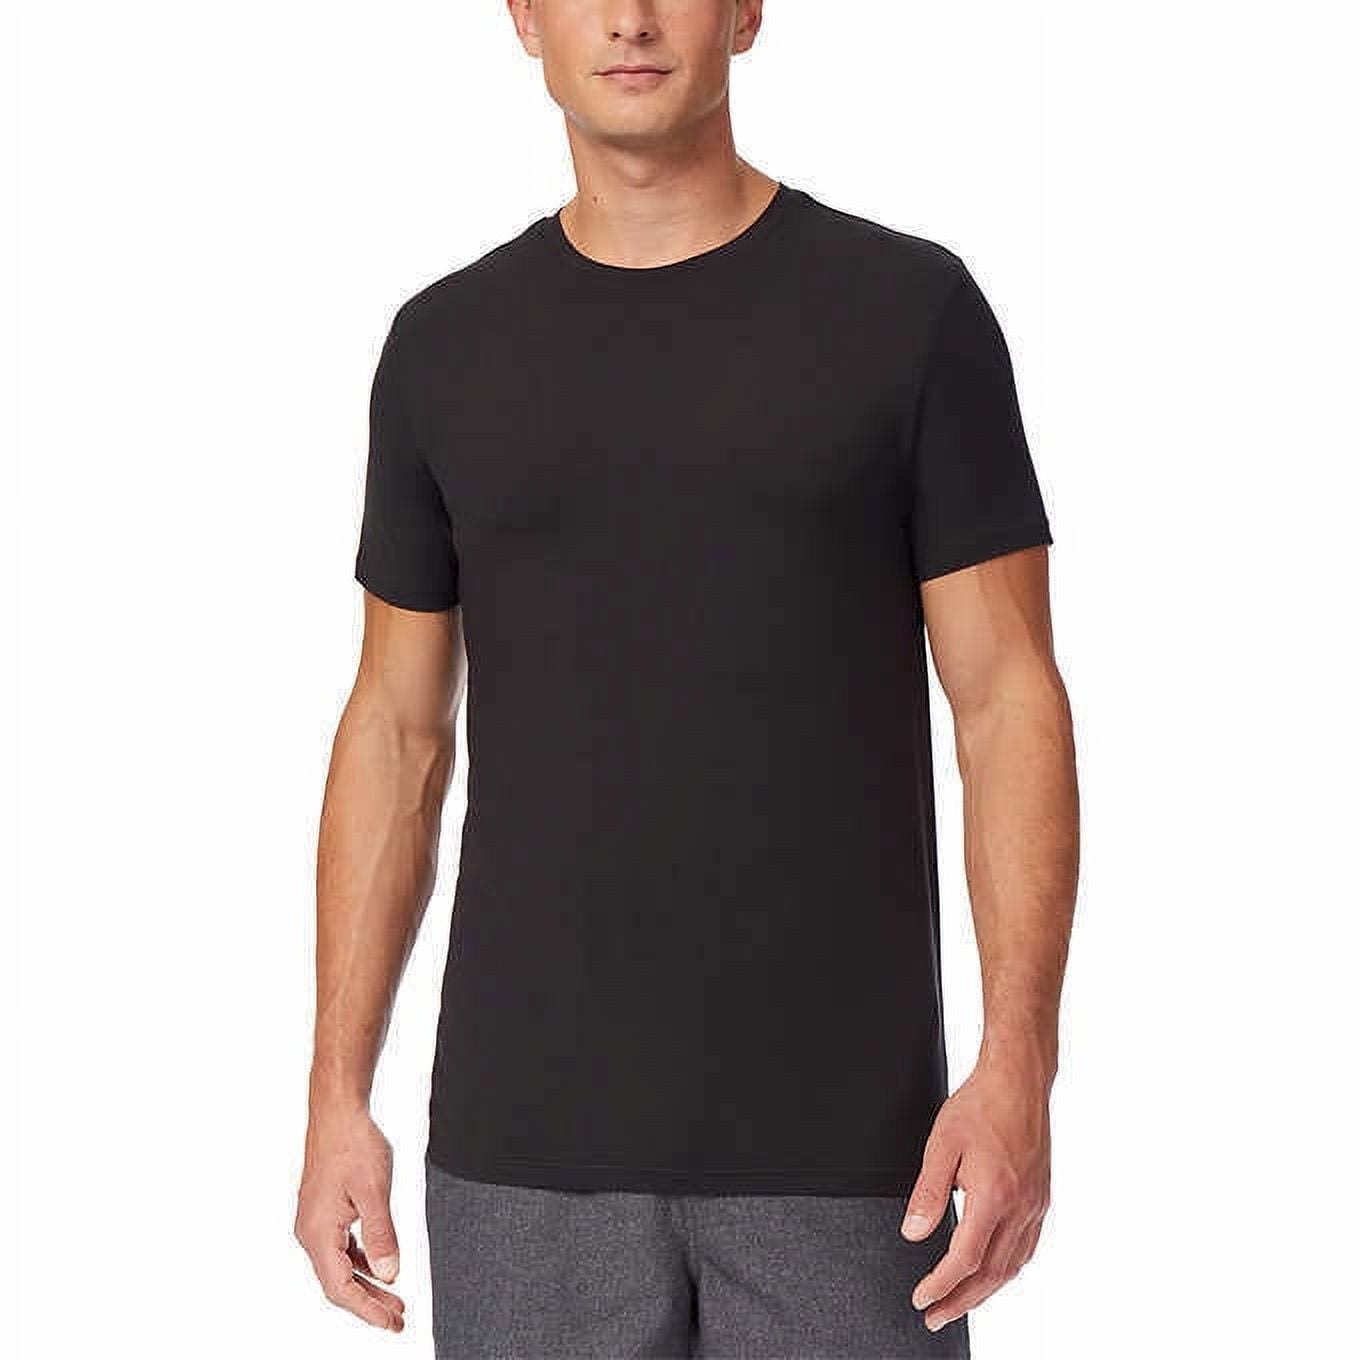 32 Degrees, Tops, 32 Degrees Cool 3 Pack Short Sleeve Scoop Neck